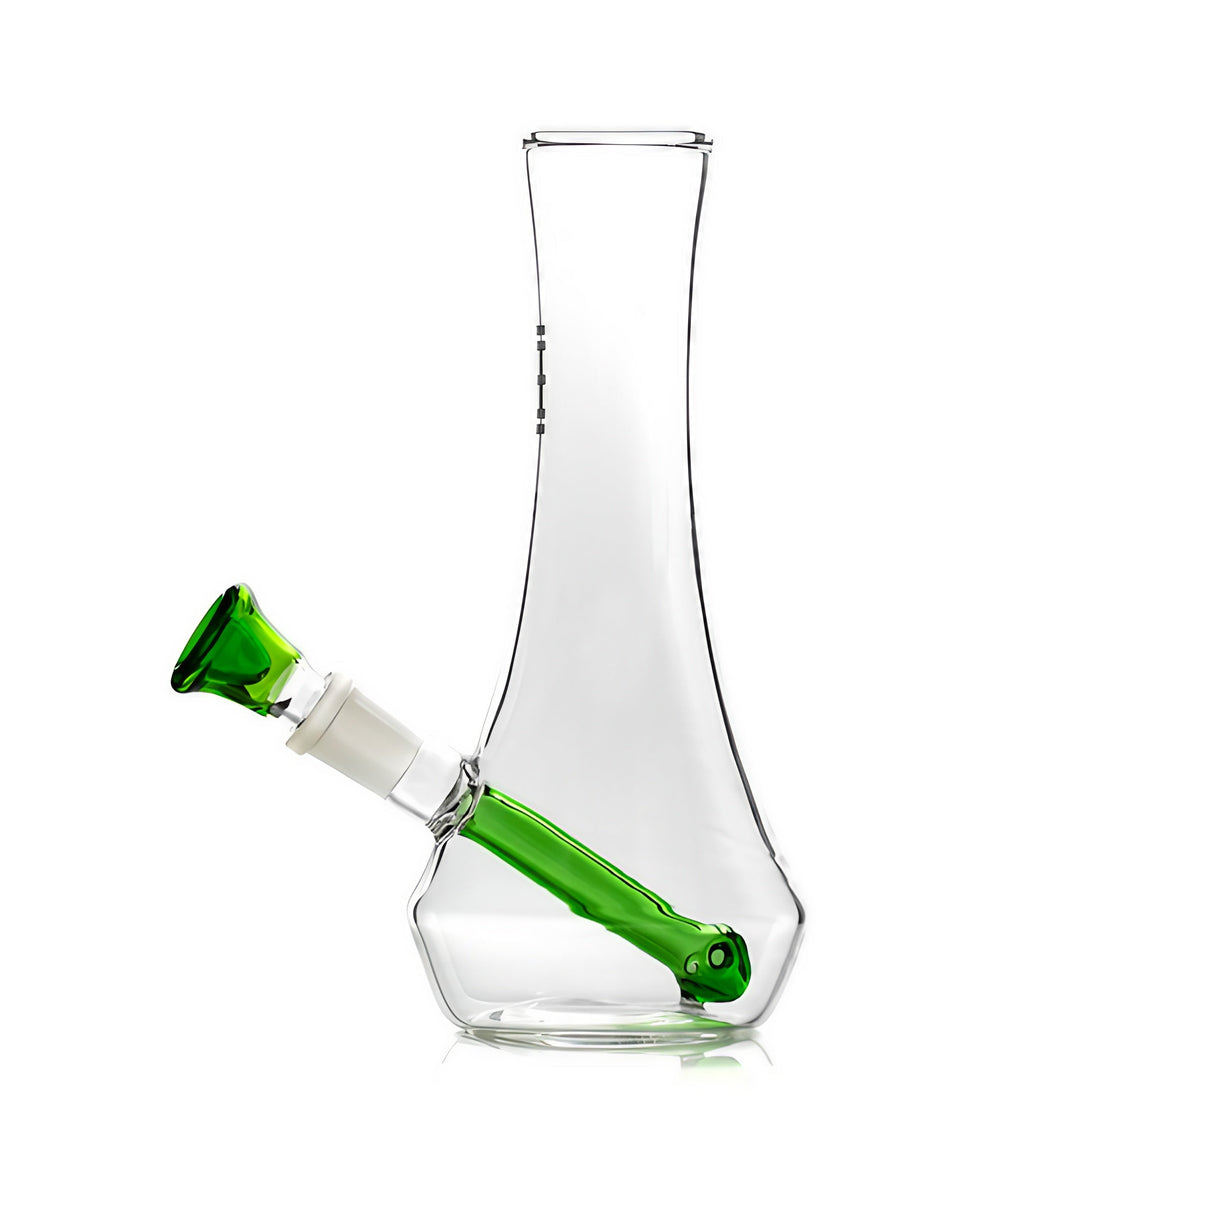 Hemper Flower Vase Bong with Green Accents, 7" Compact Design, Front View on White Background